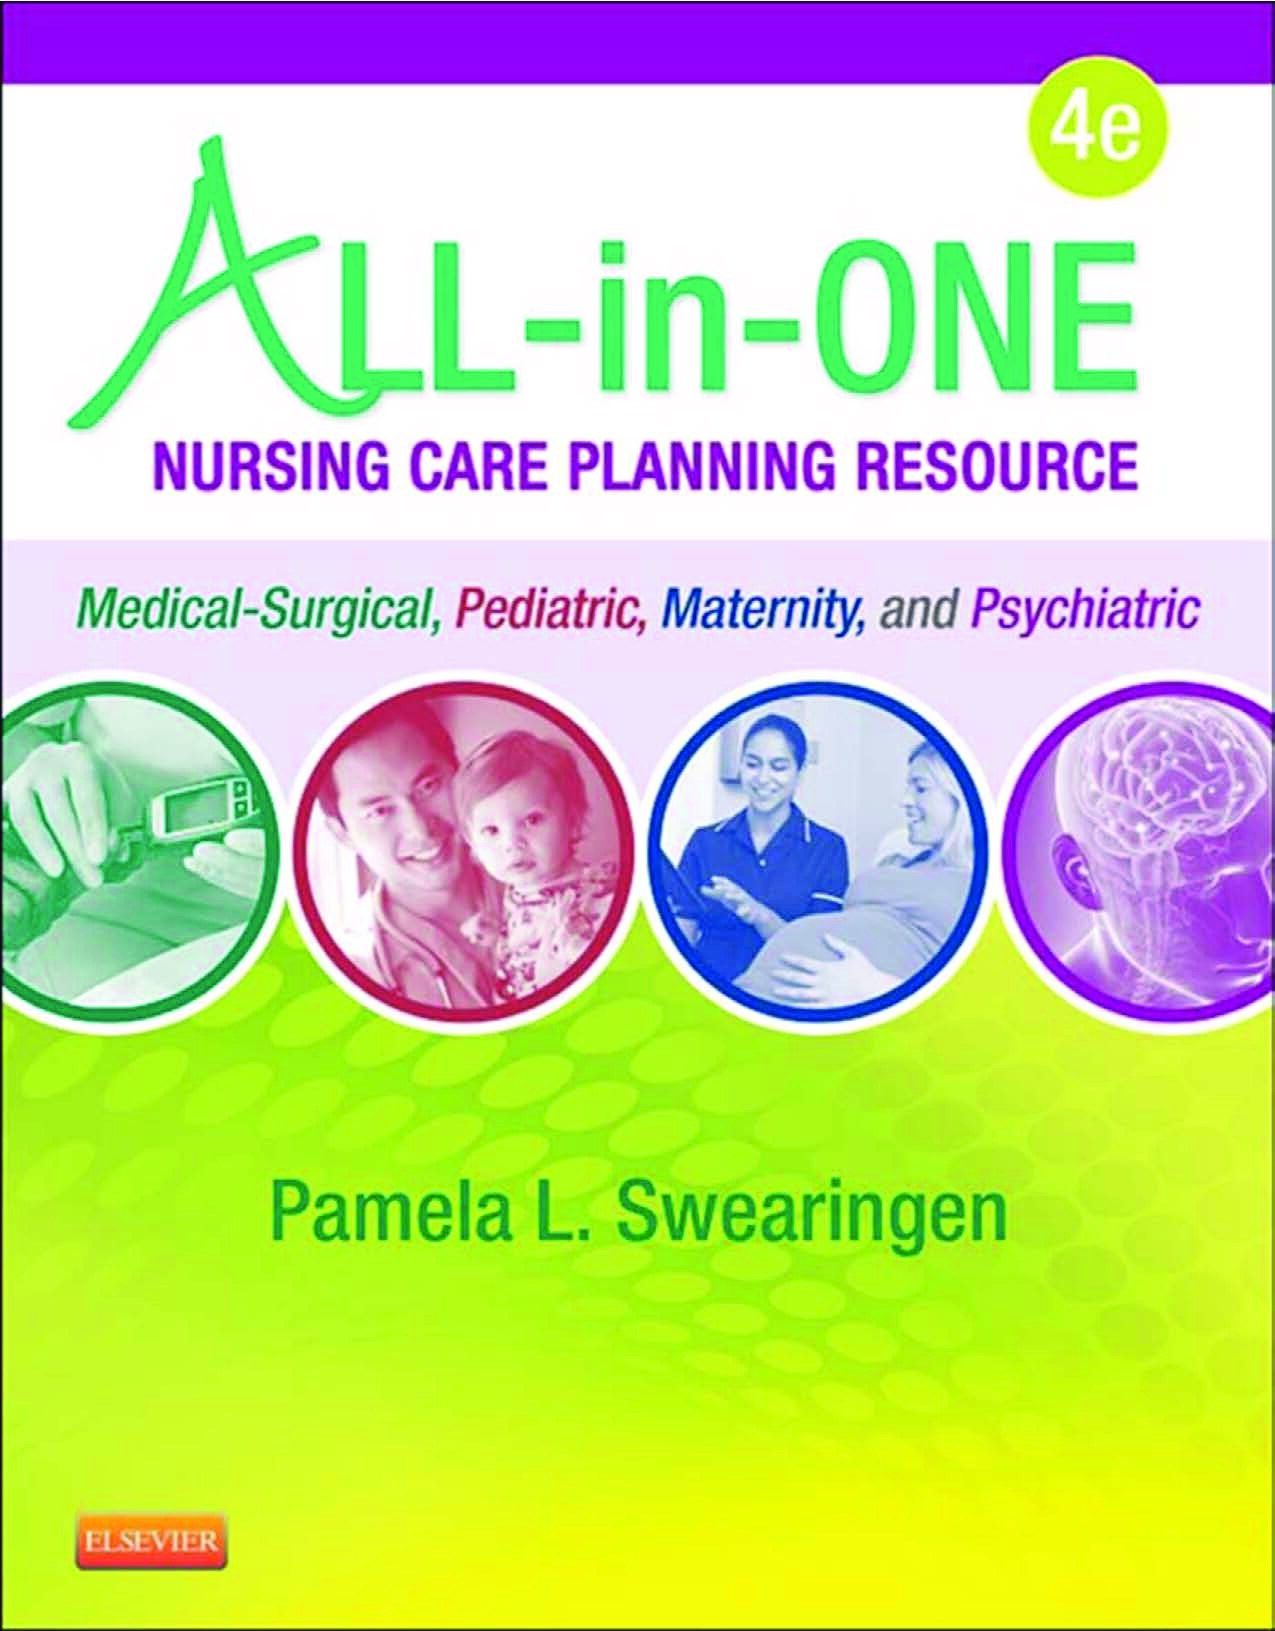 All-in-One Nursing Care Planning Resource: Medical-Surgical, Pediatric, Maternity, and Psychiatric-Mental Health